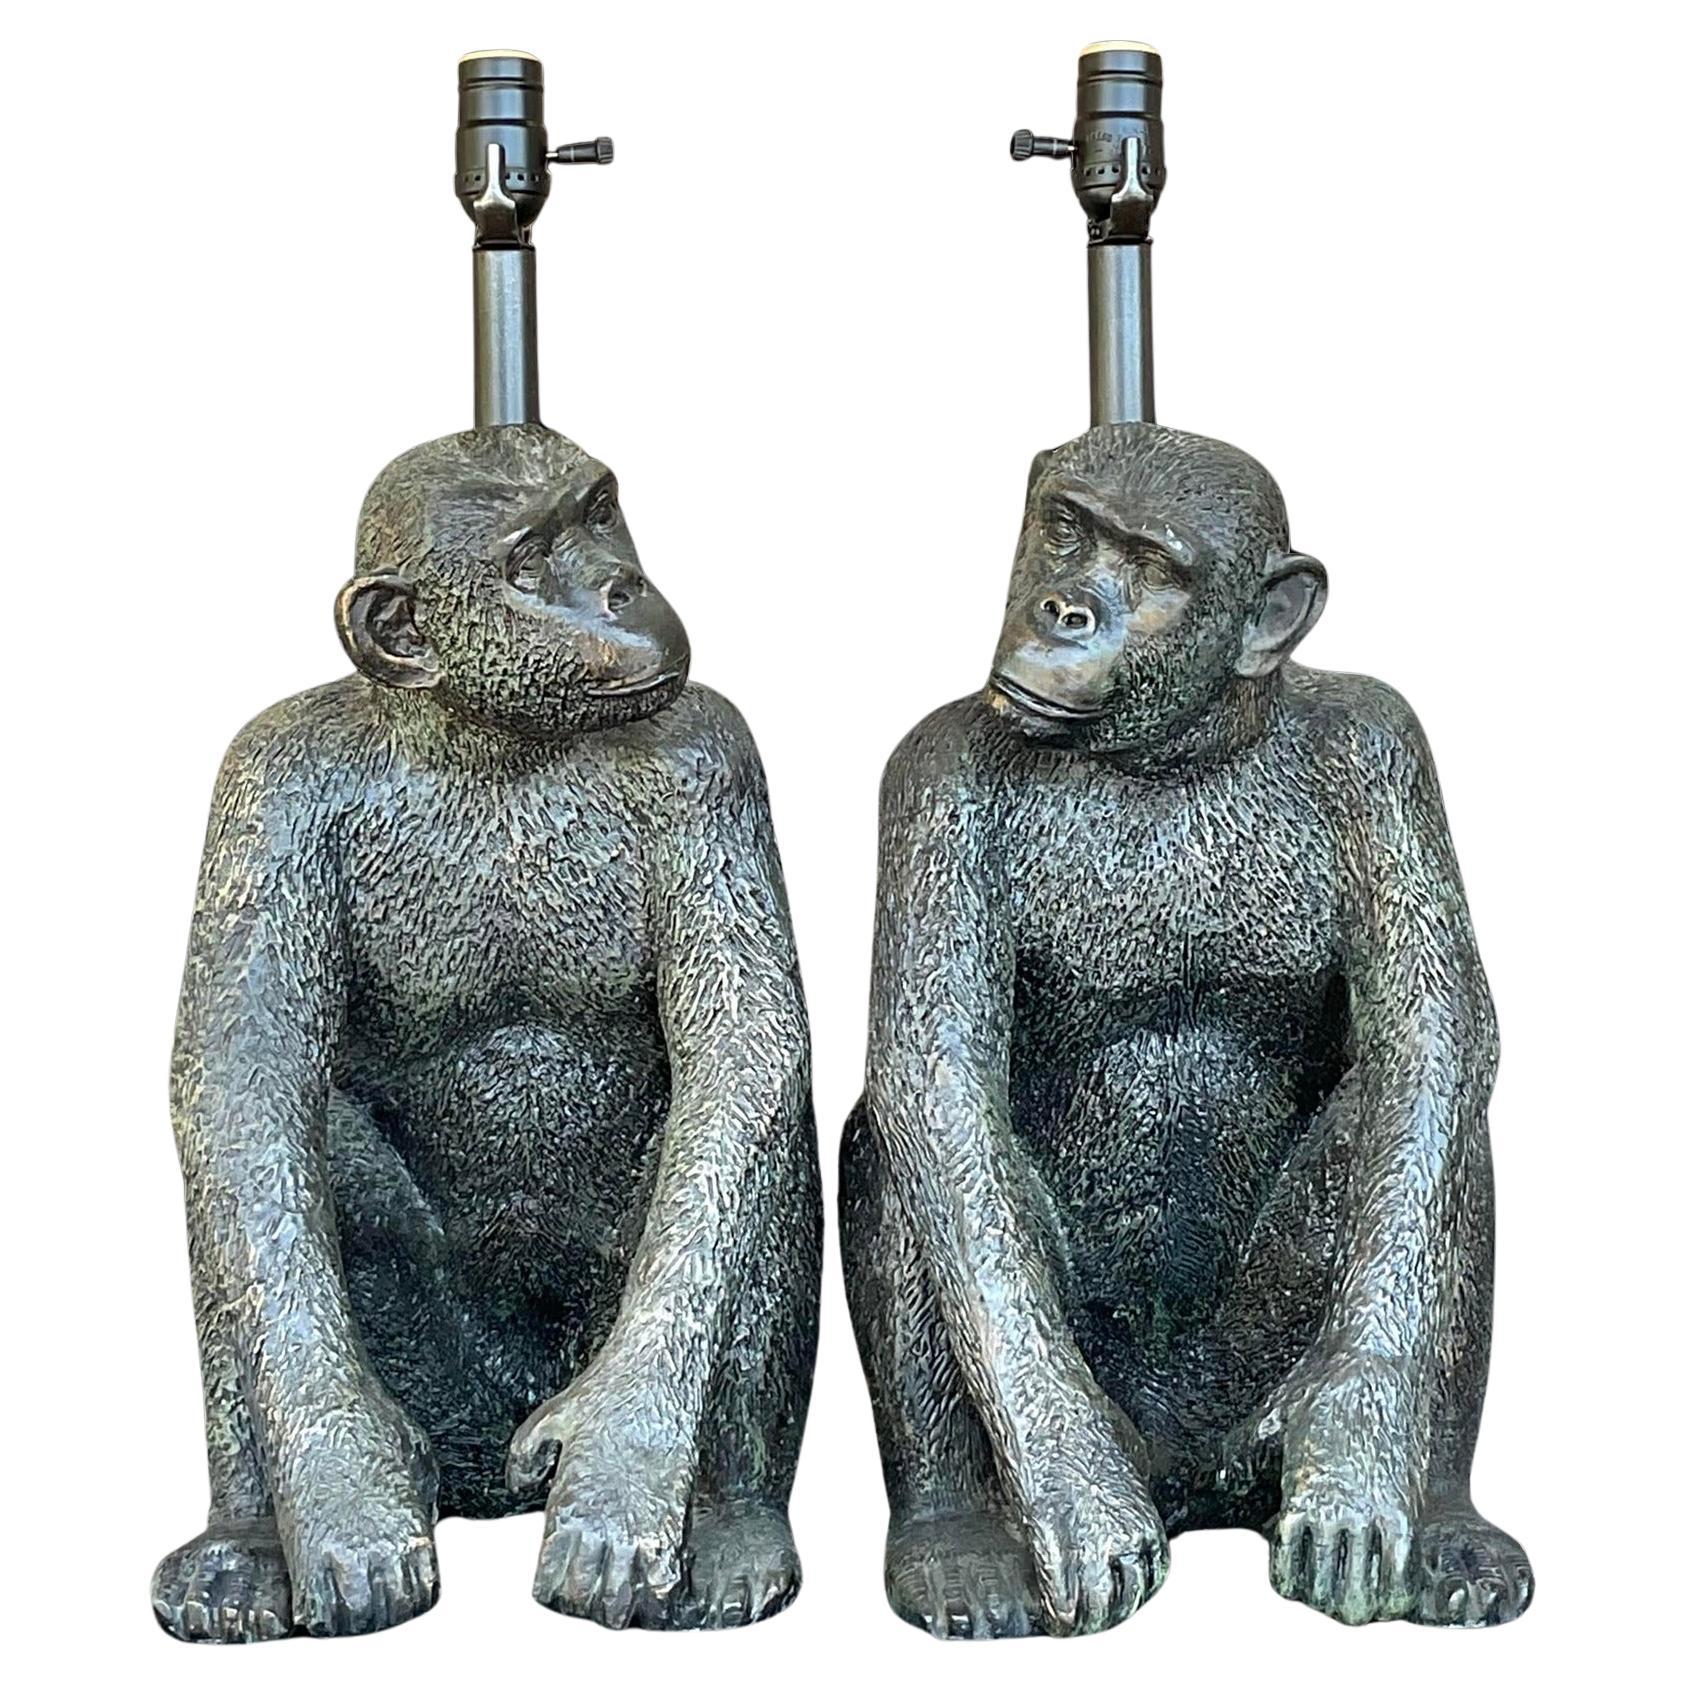 Vintage Boho Patinated Monkey Table Lamps - a Pair For Sale